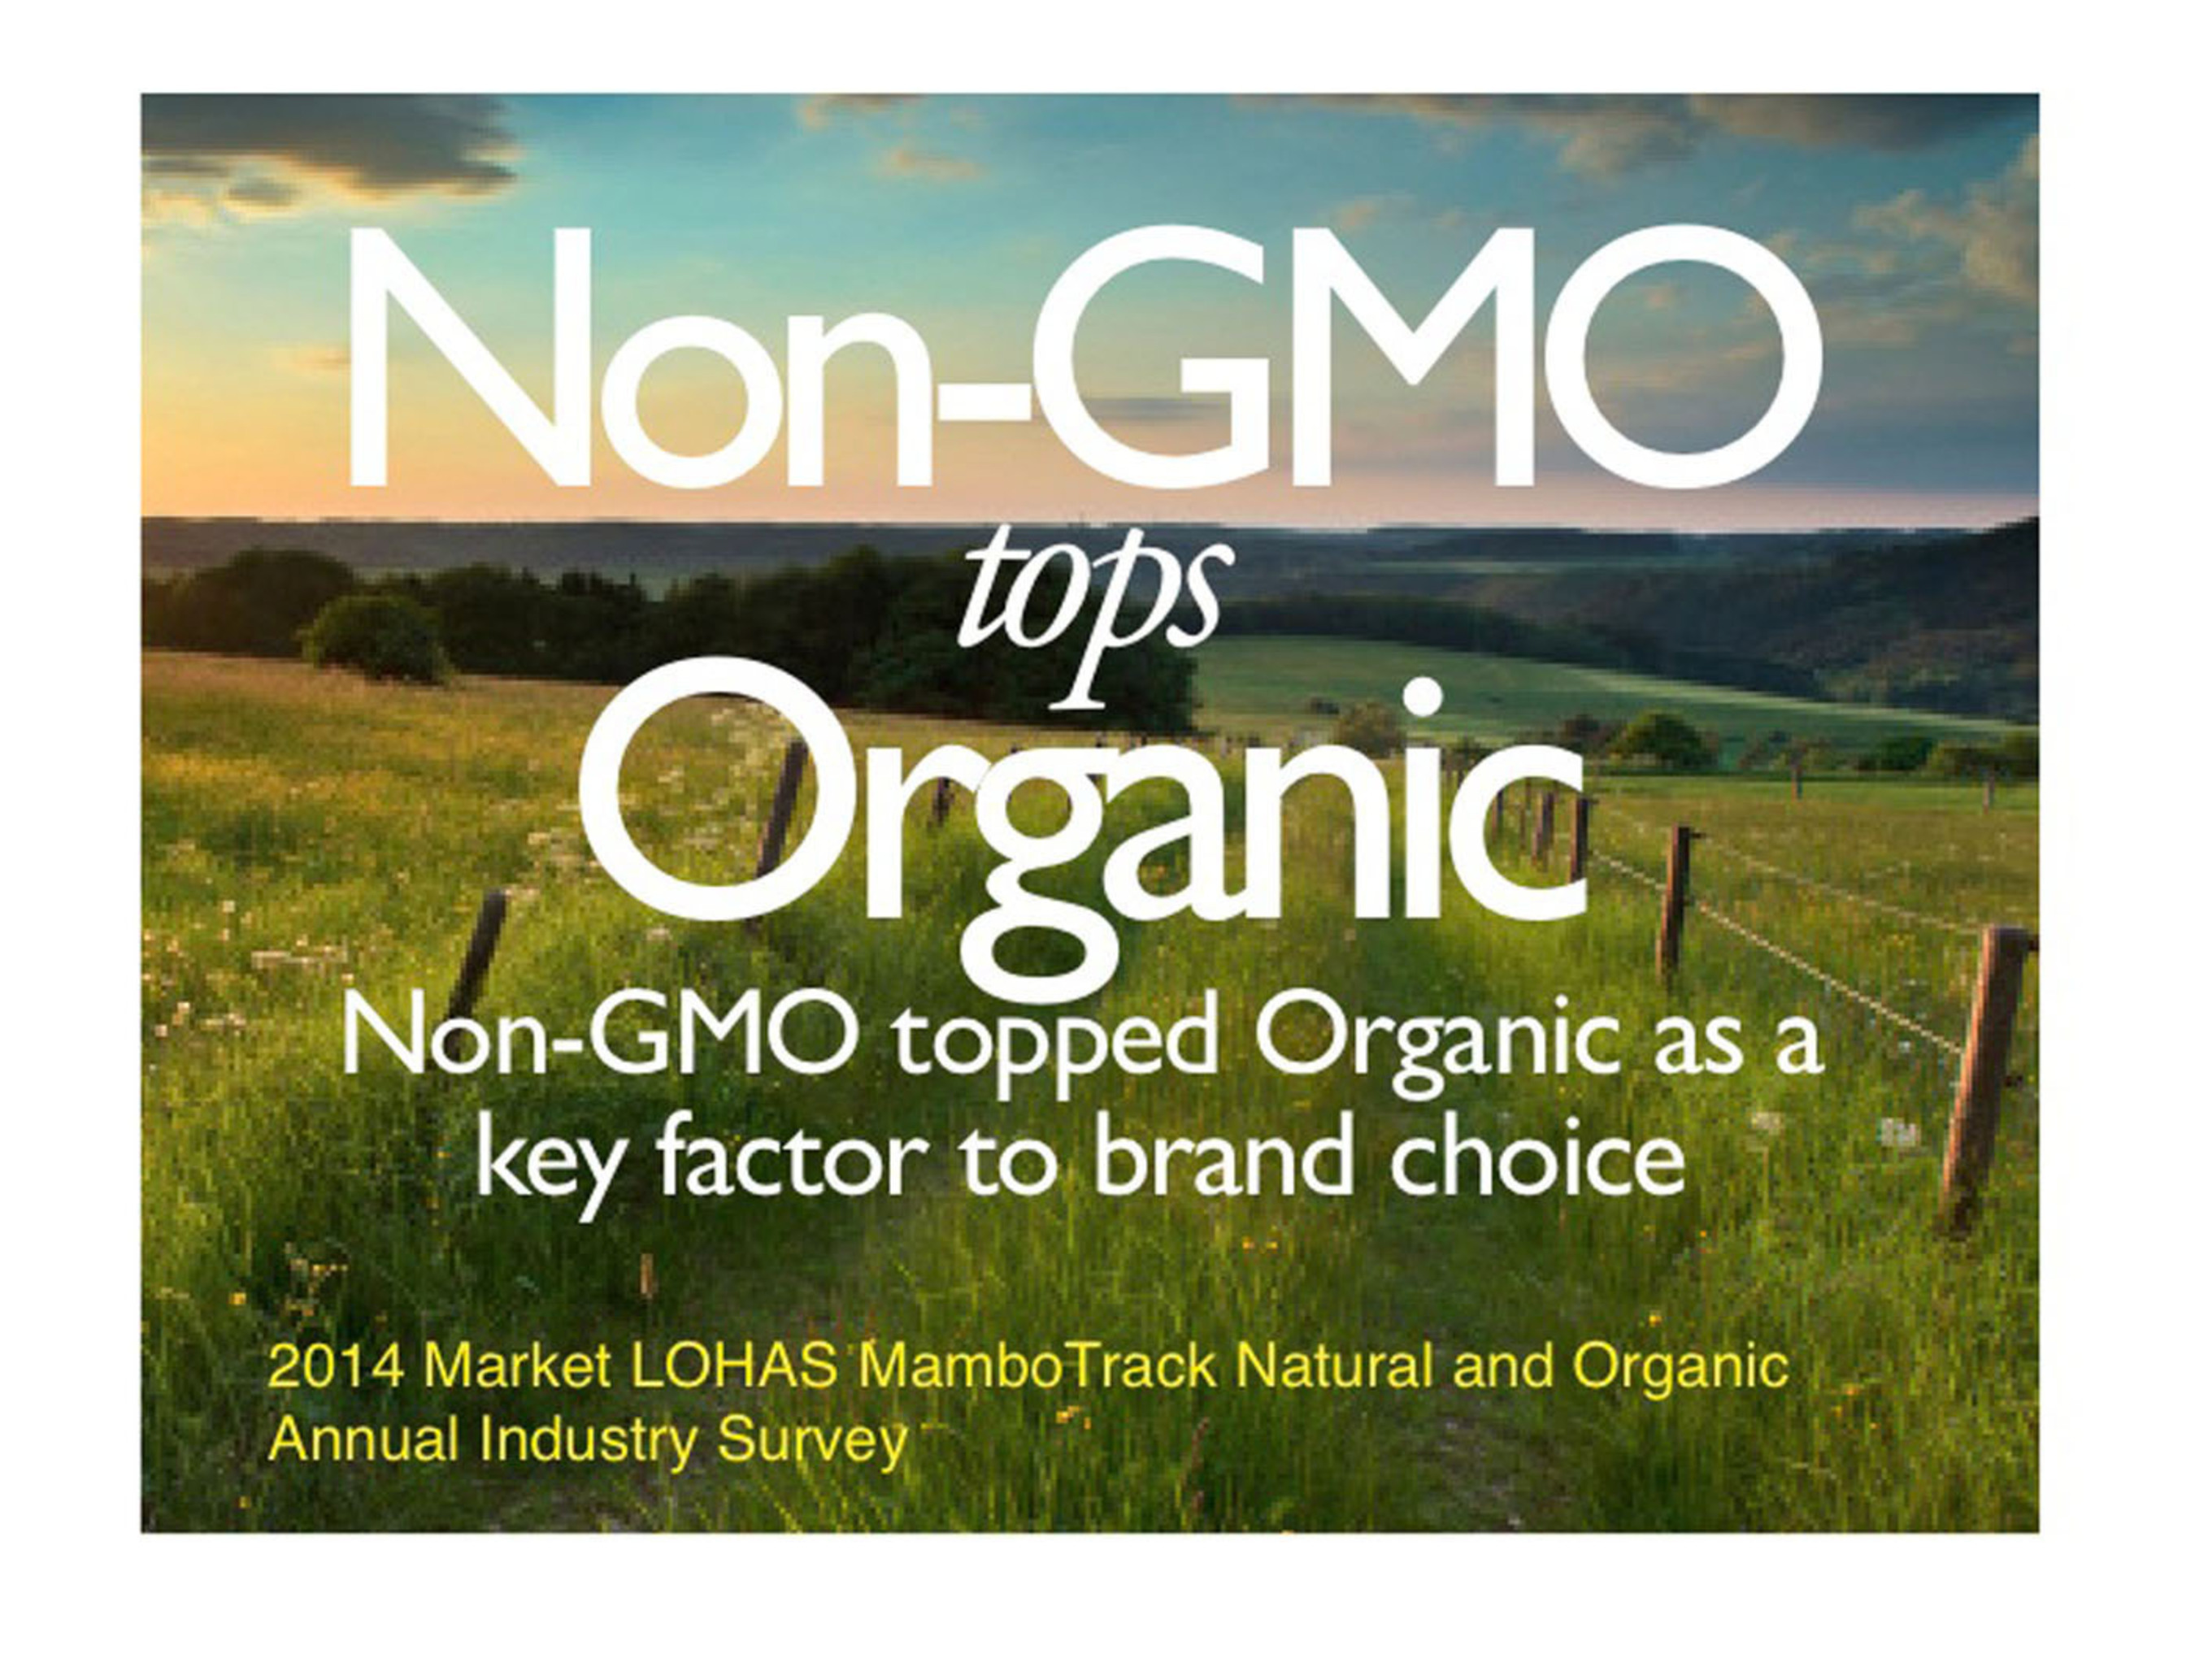 Non-GMO tops Organics in Brand Choice 2014 Market LOHAS MamboTrack Natural & Organic Consumer Research. Infographic by Vittles Food Marketing. (PRNewsFoto/Market LOHAS (Lifestyle Of Health And Sustainability)) (PRNewsFoto/MARKET LOHAS (LIFESTYLE OF ...)